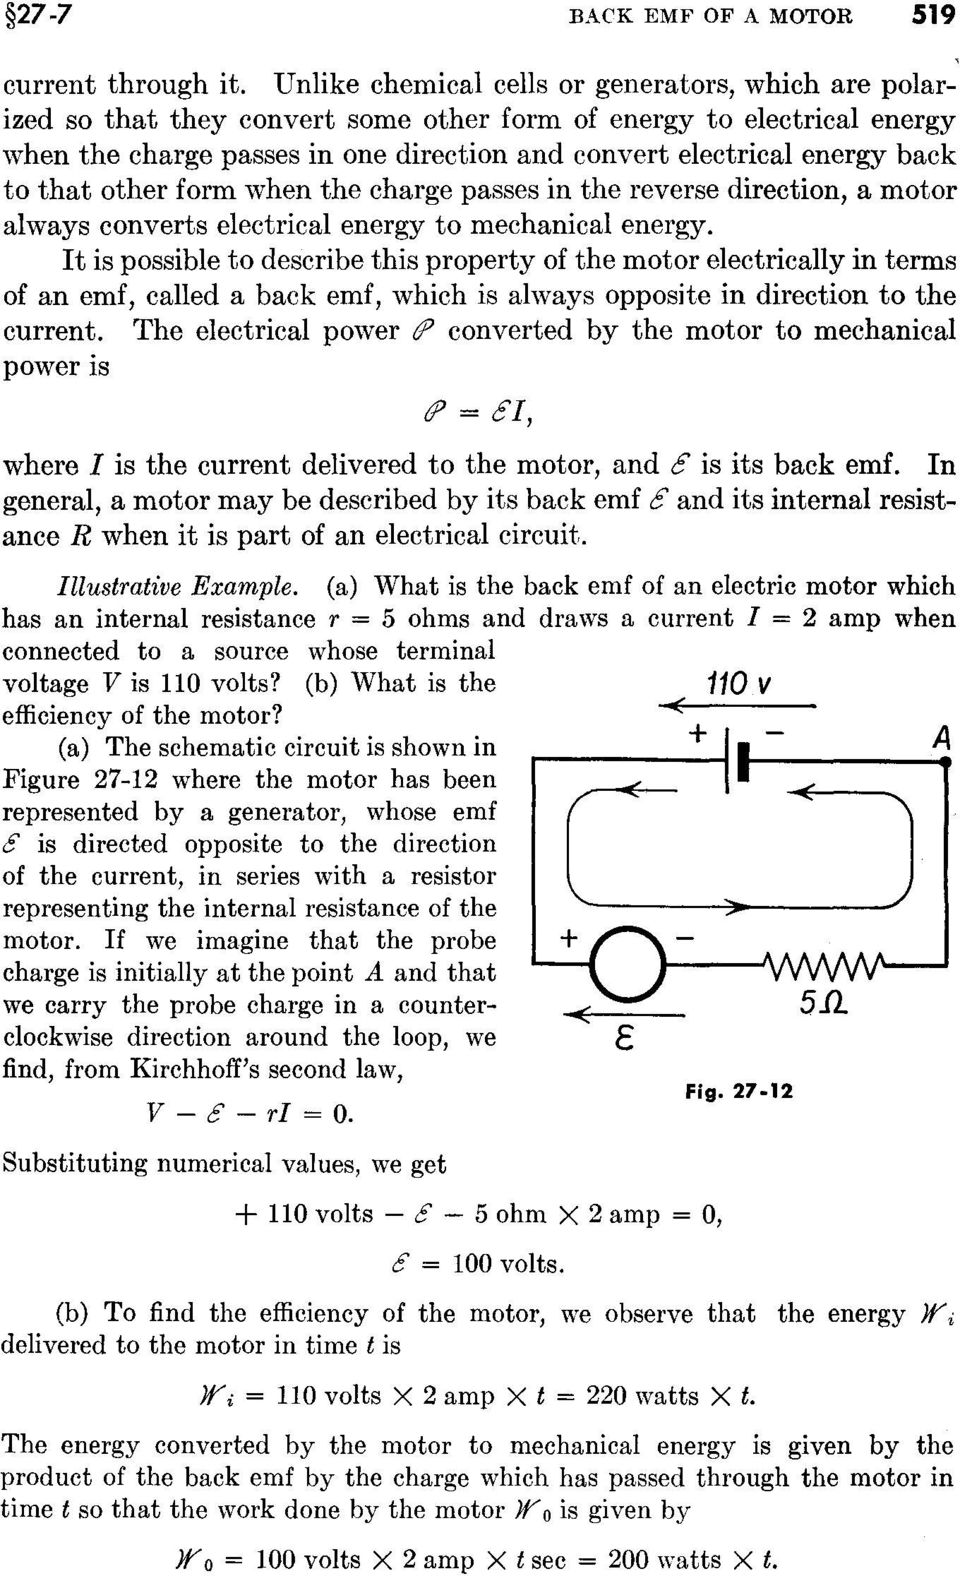 to that other form when the charge passes in the reverse direction, a motor always converts electrical energy to mechanical energy.